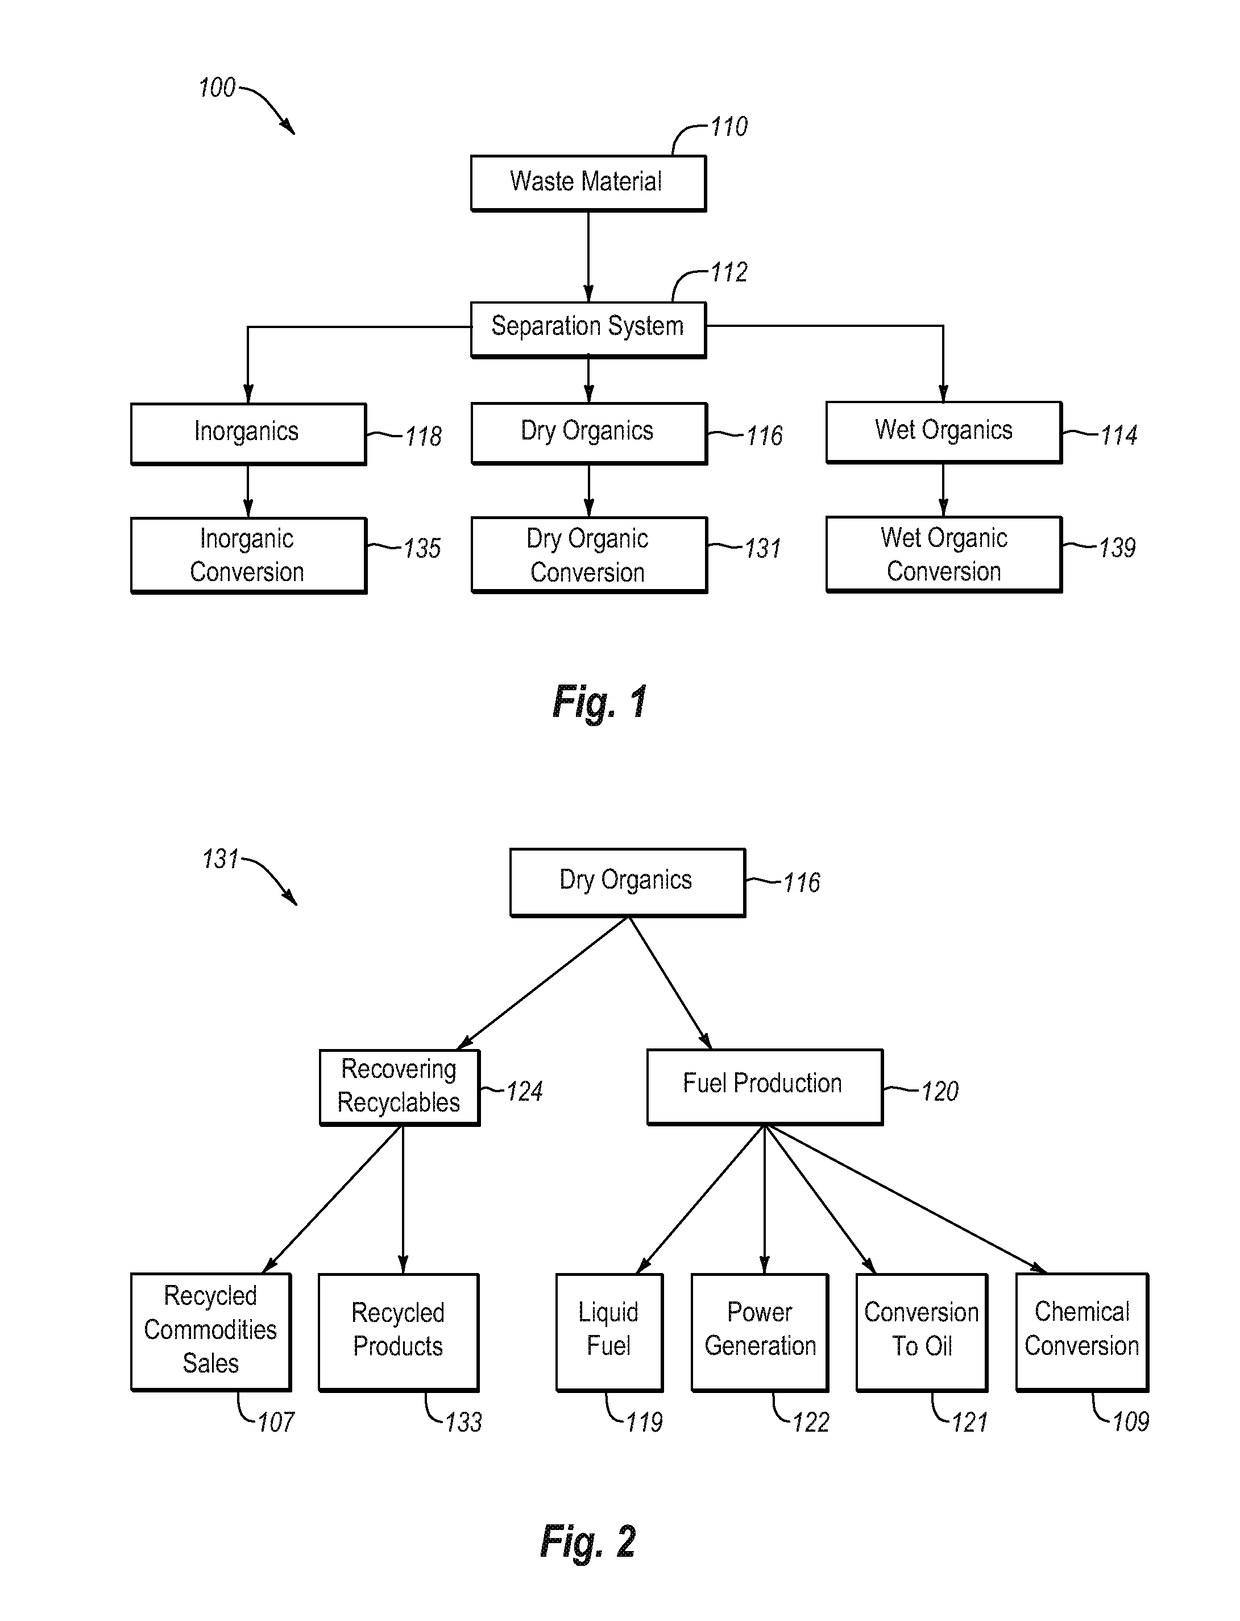 Systems and methods for processing mixed solid waste